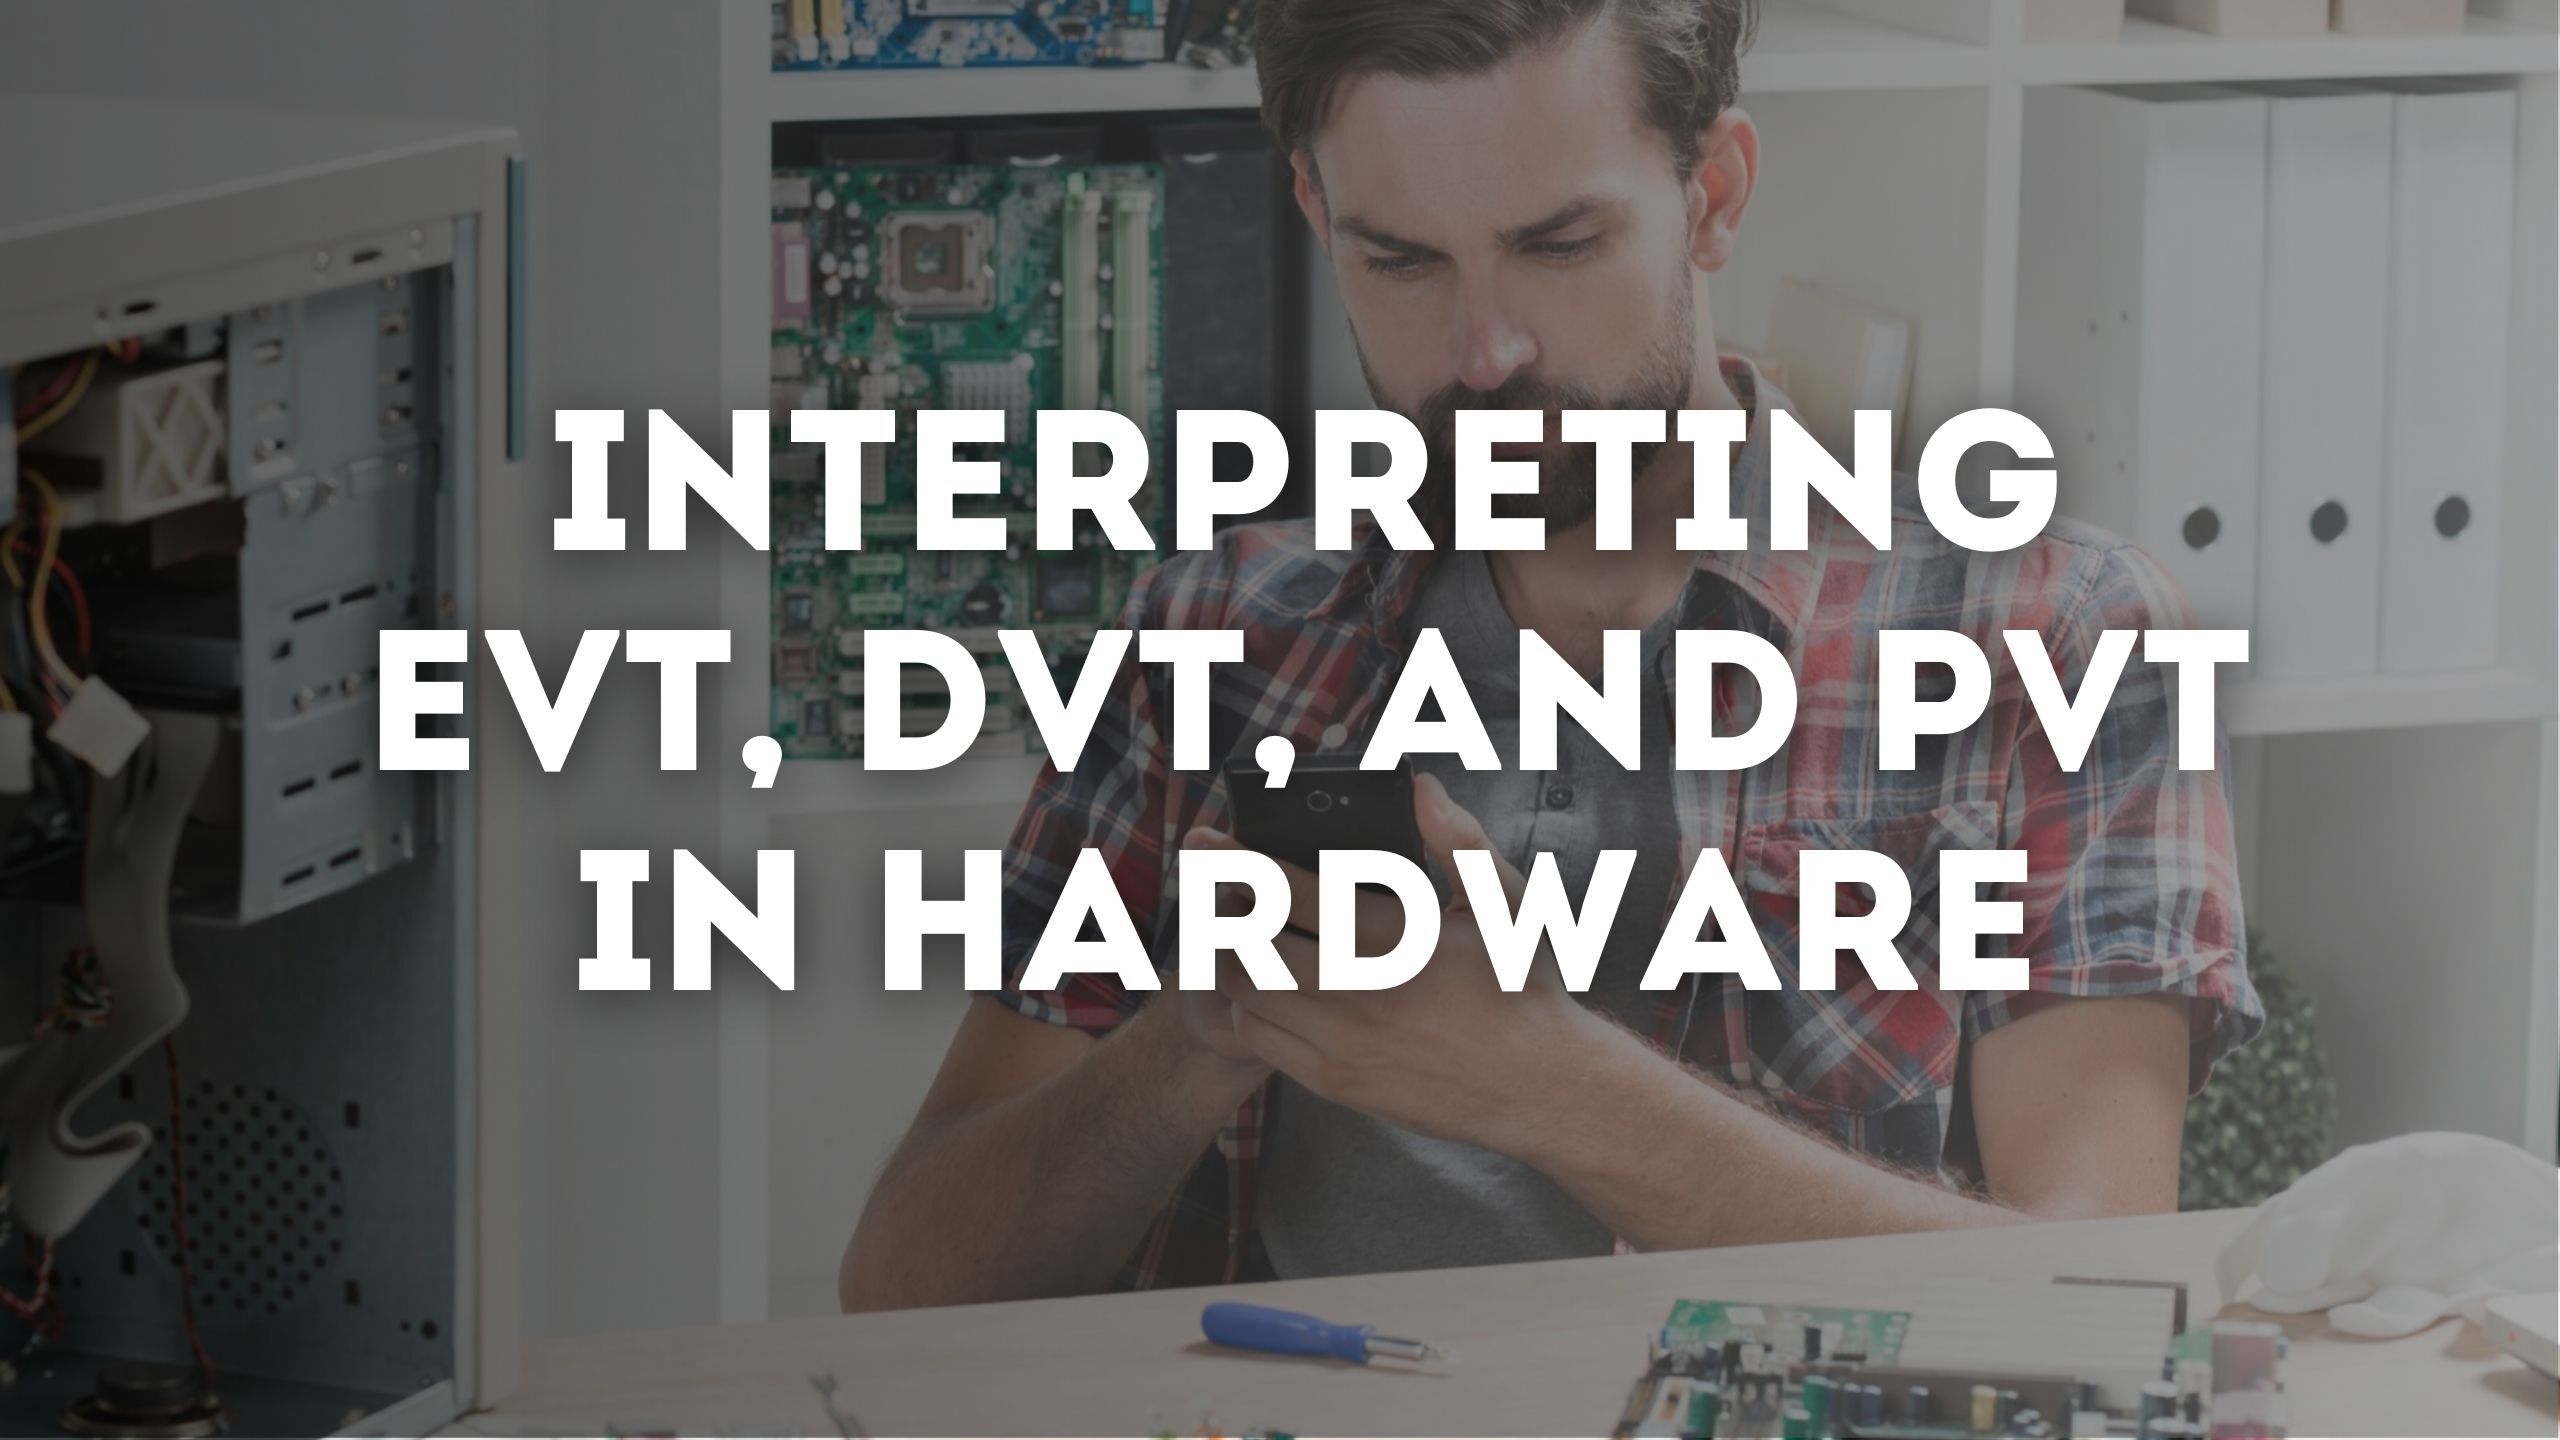 Cracking the Code: Interpreting EVT, DVT, and PVT in Hardware